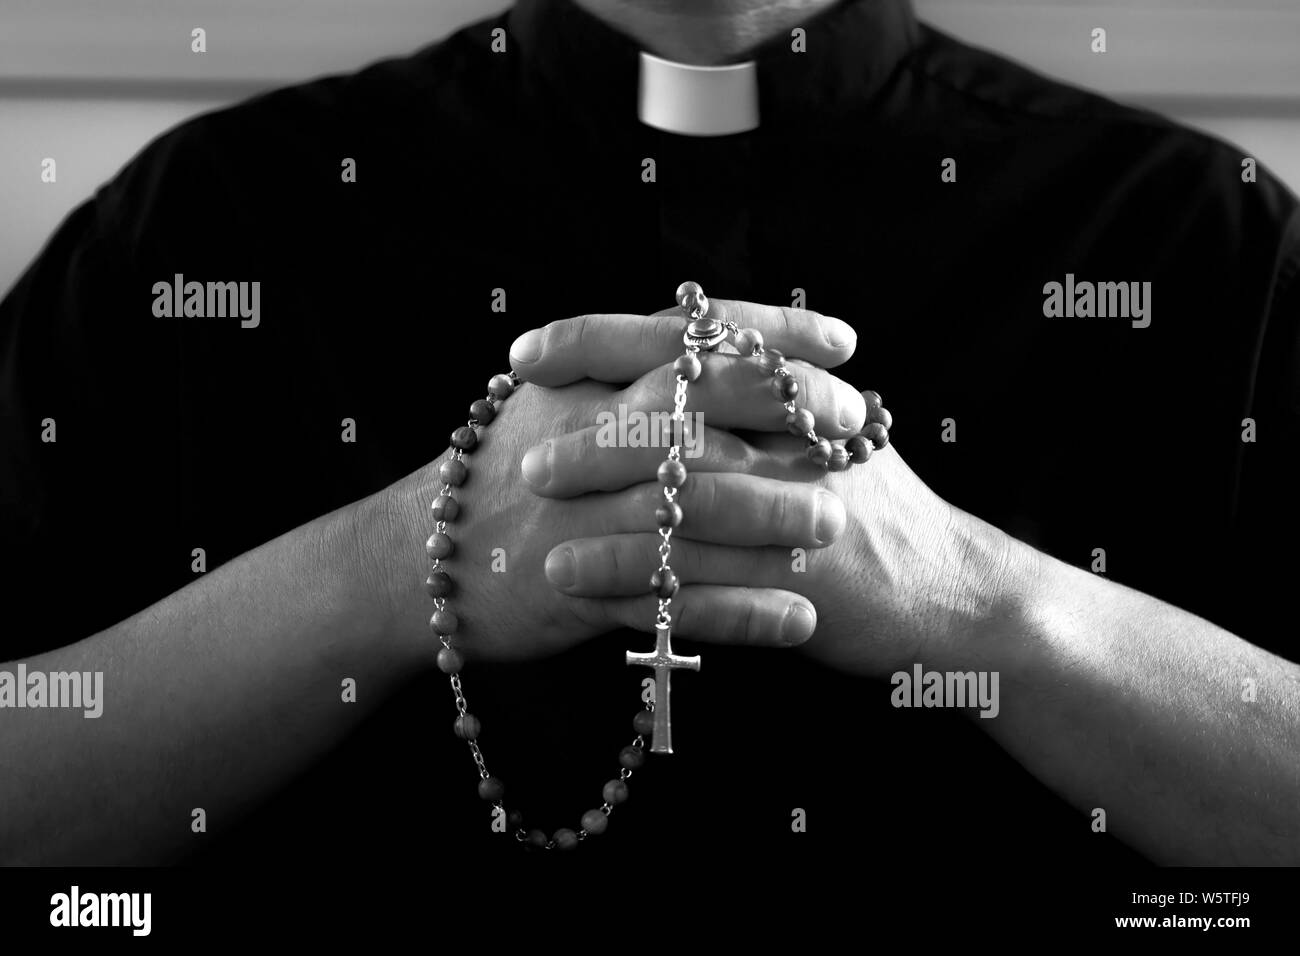 Praying priest with rosary beads Stock Photo